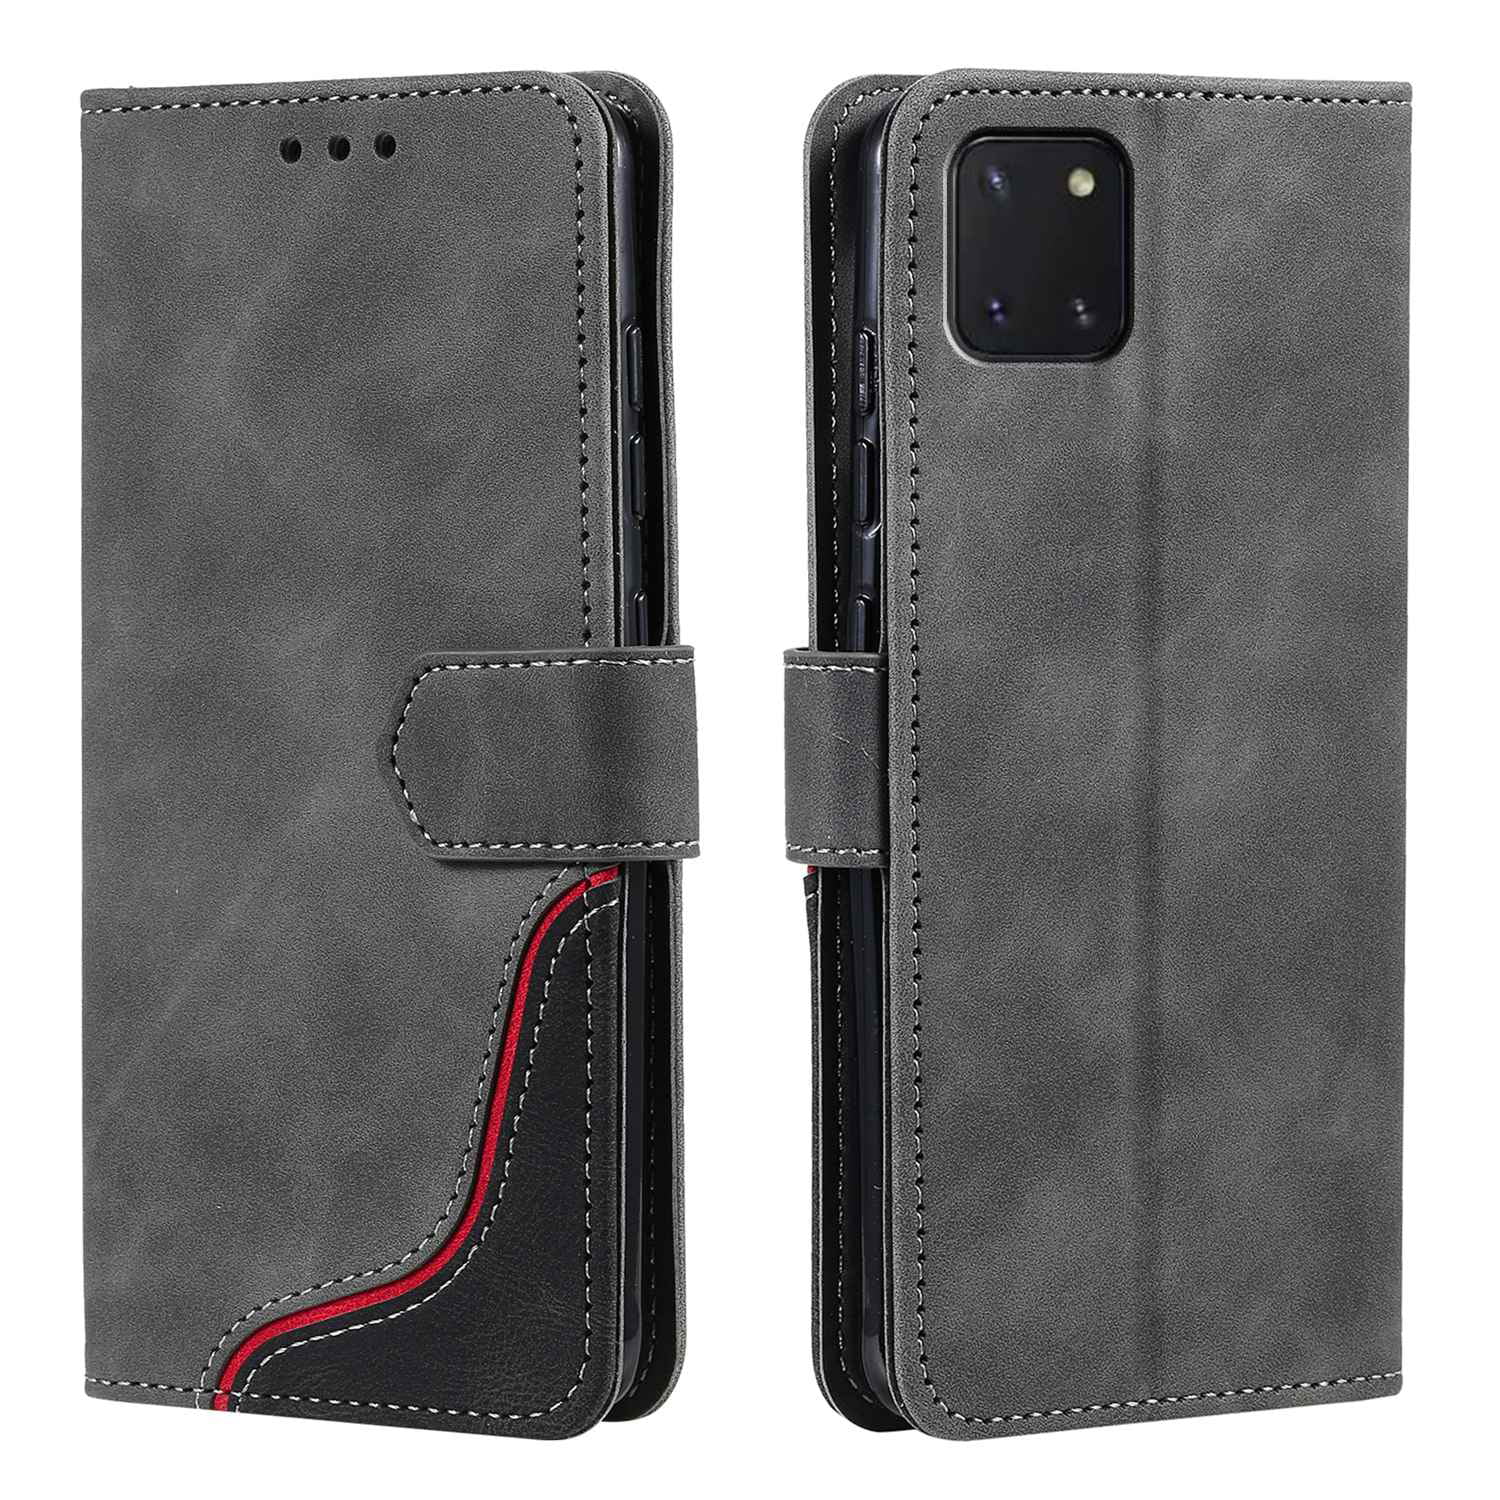 PU Leather Flip Cover Compatible with Samsung Galaxy Note 10 Gray Wallet Case for Samsung Galaxy Note 10 